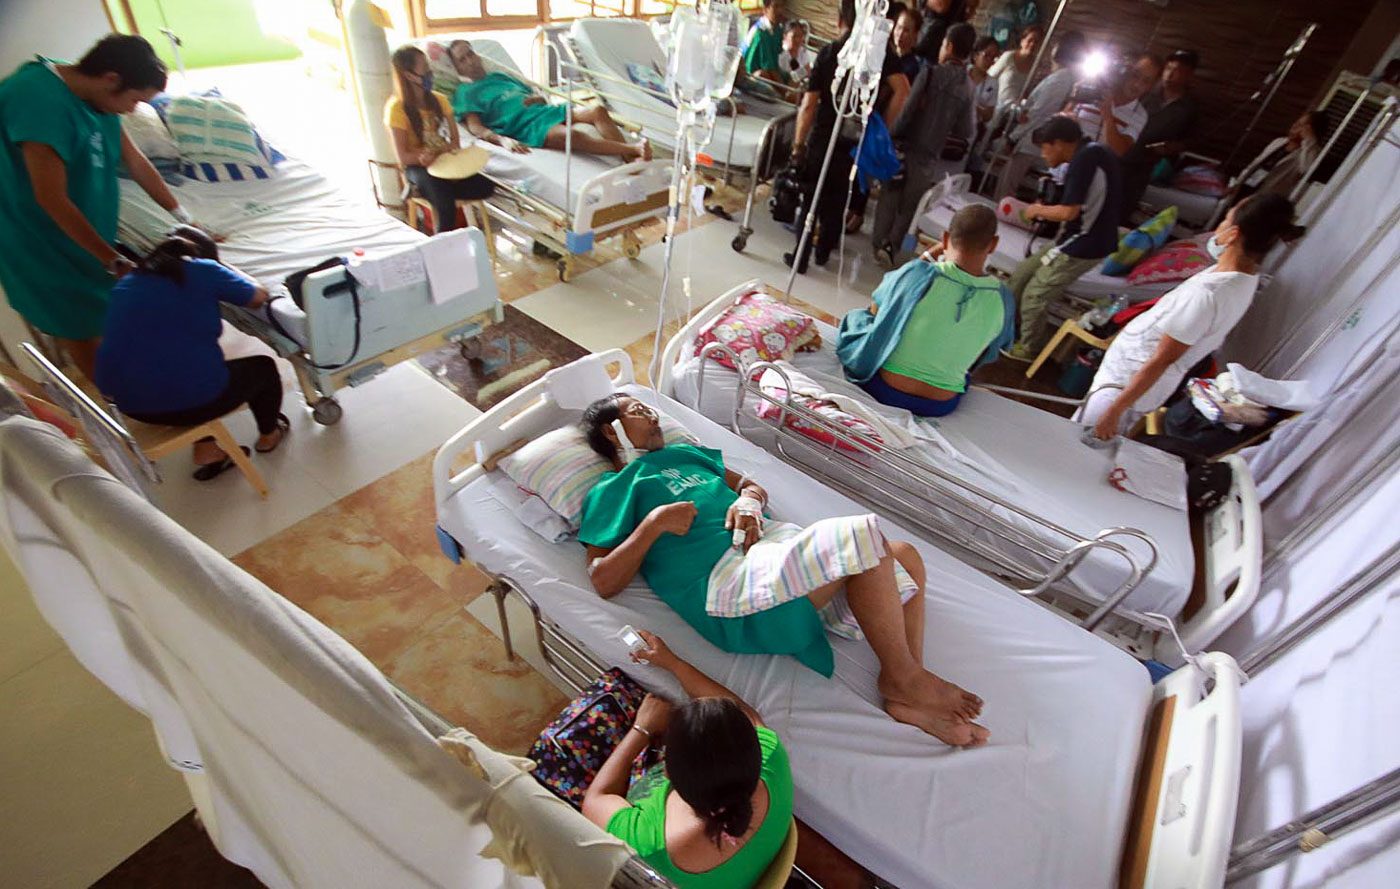 WHO to PH: ‘Real investment’ in universal health care ‘needs to happen’